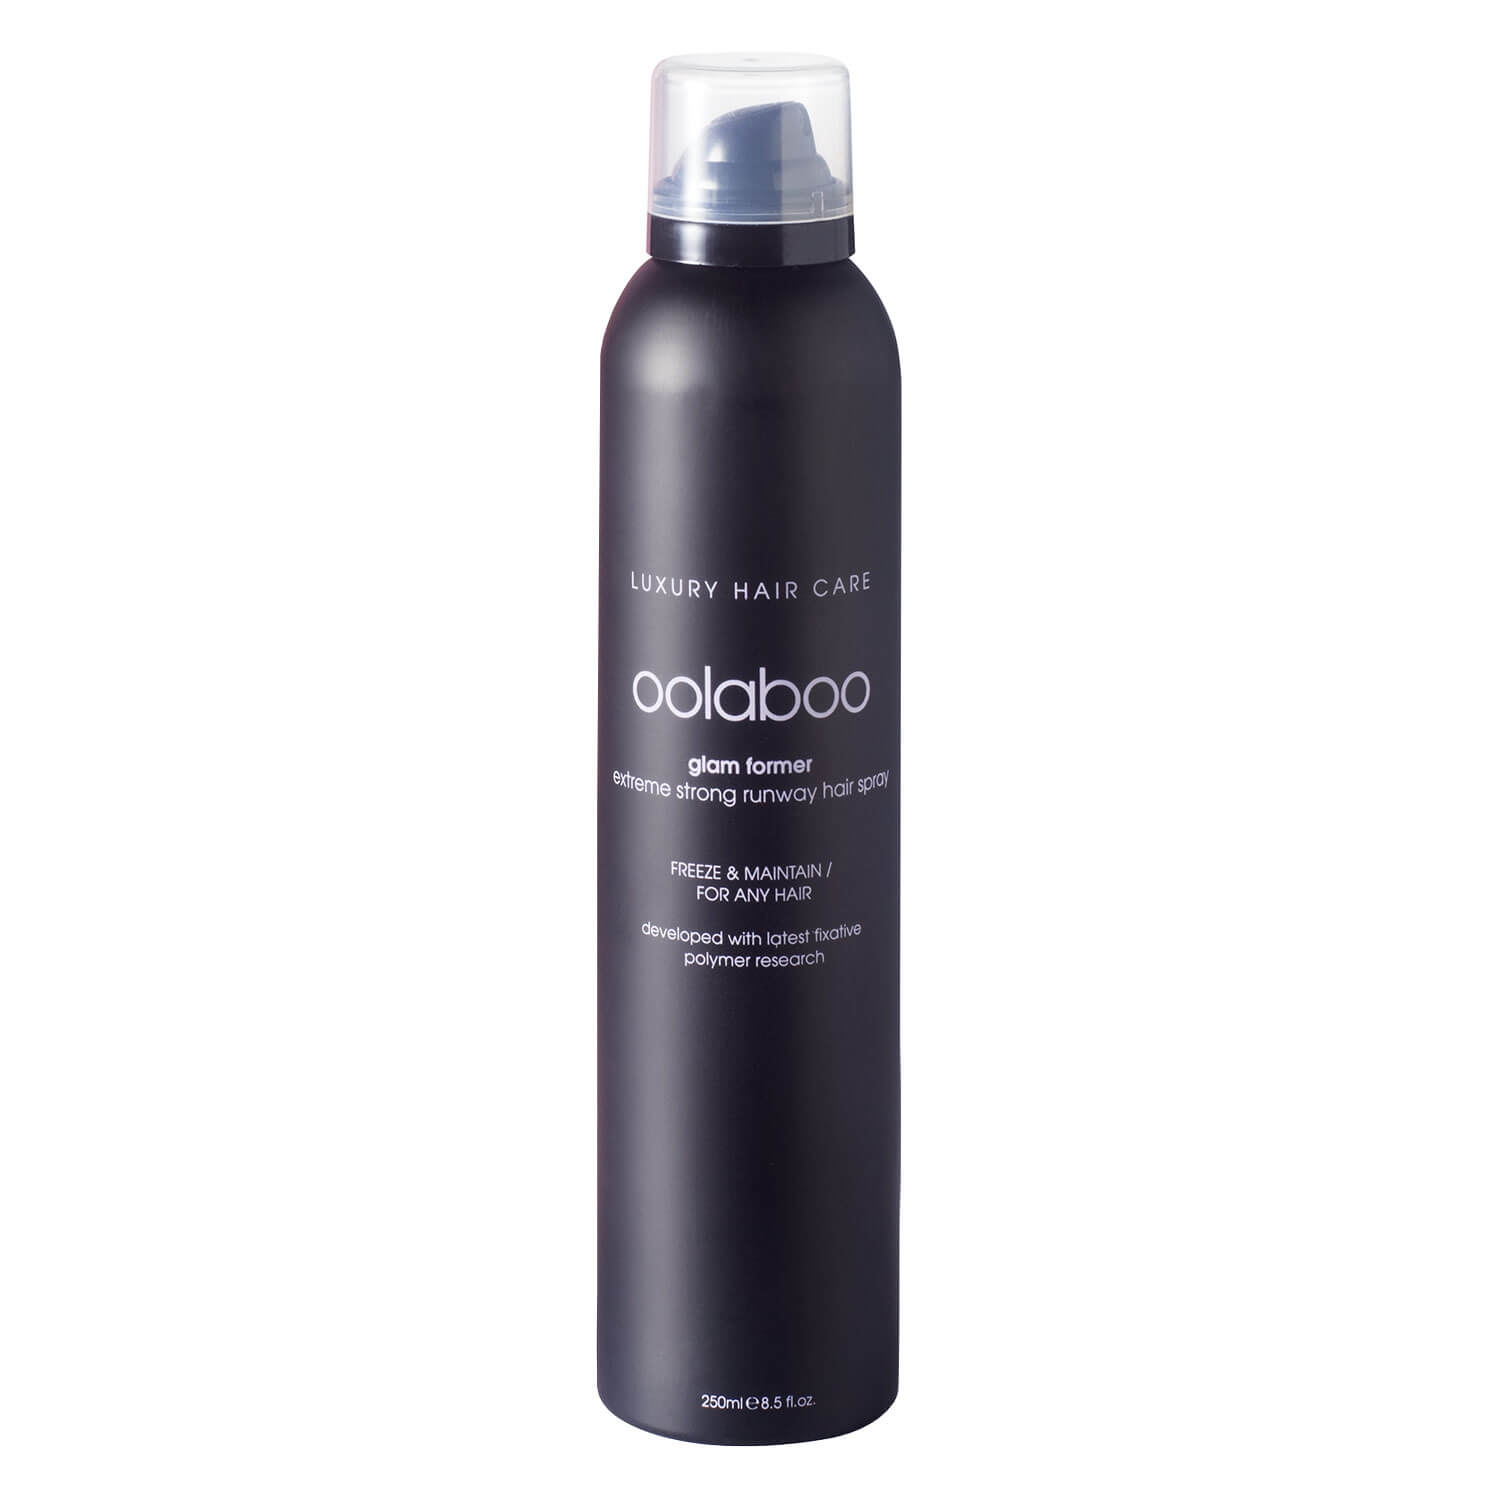 Product image from glam former - runway hair spray